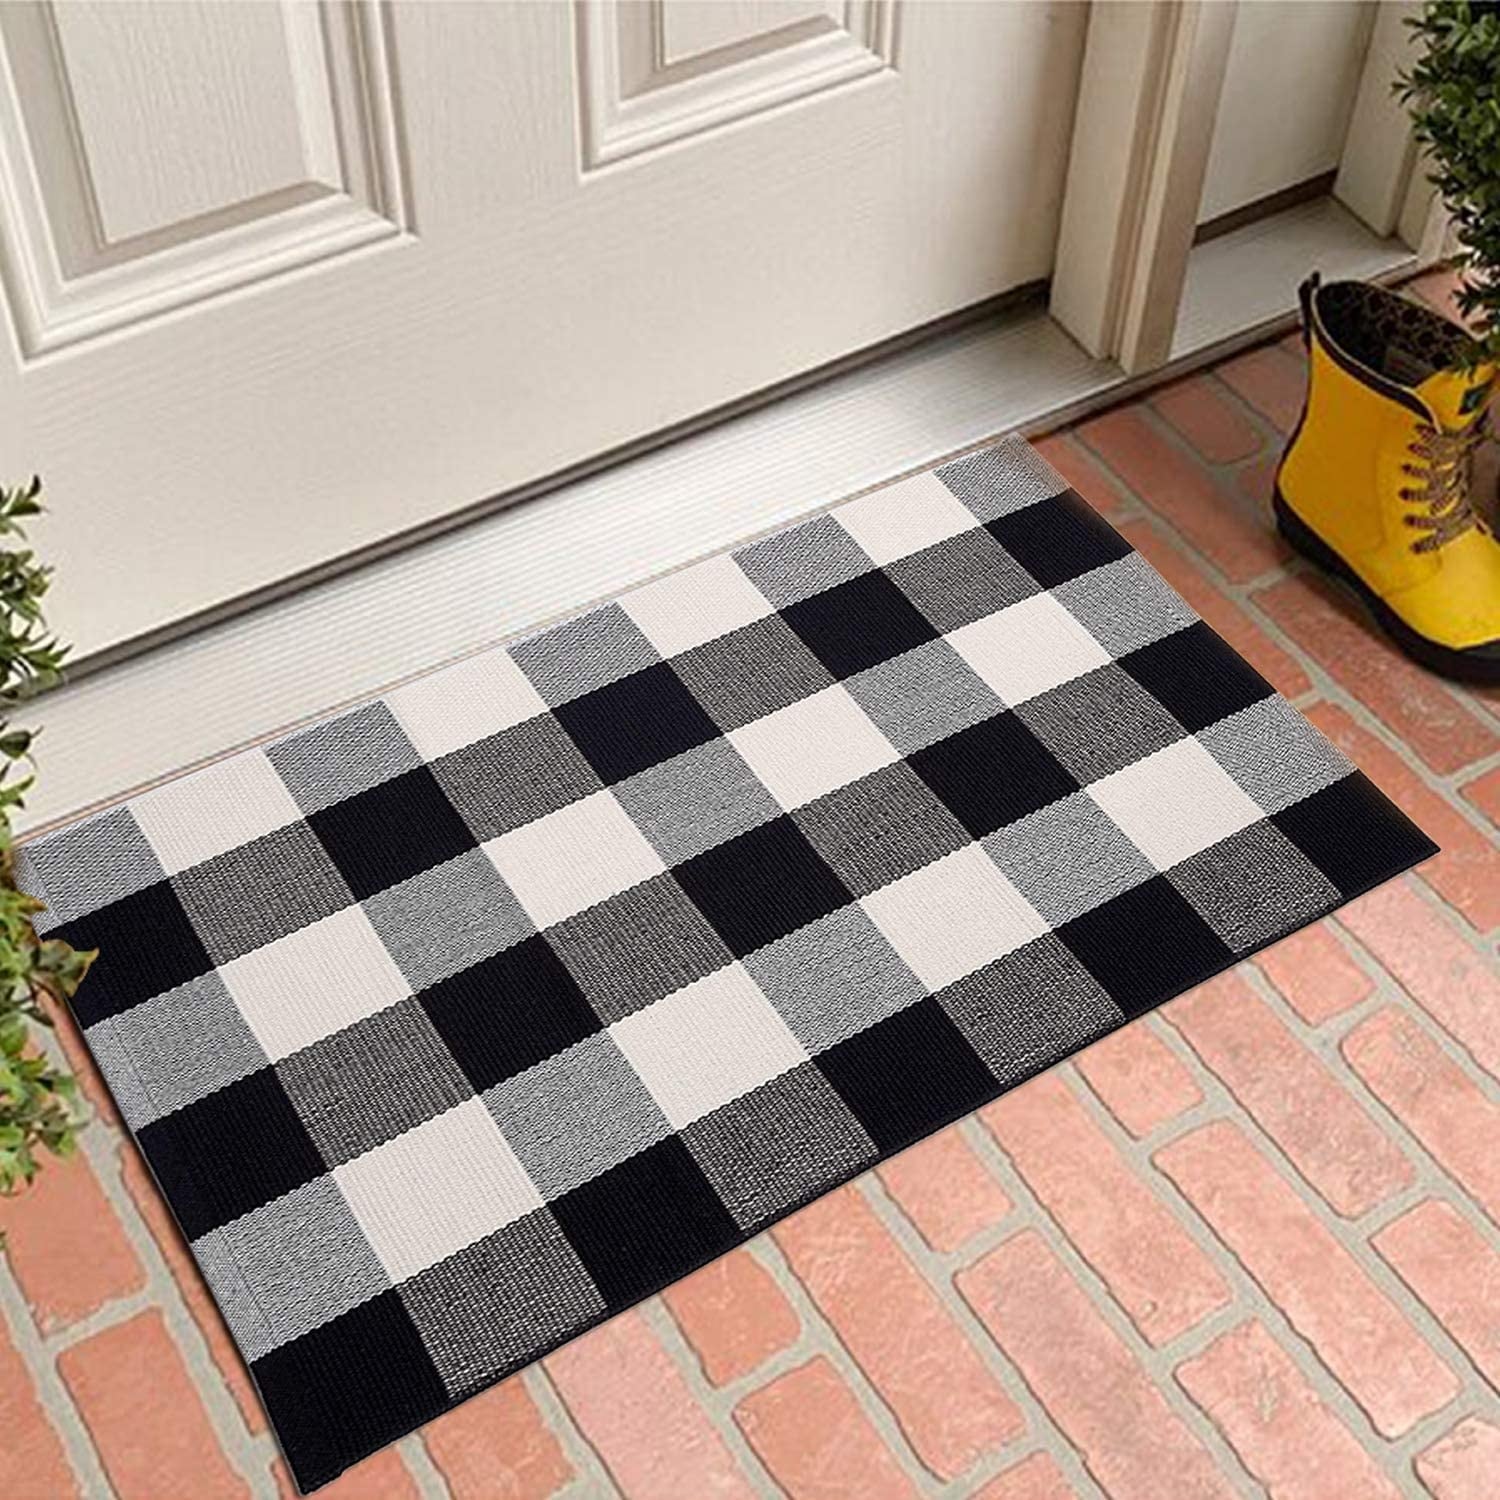 https://ak1.ostkcdn.com/images/products/is/images/direct/54acf2c589507a941349f9a978686777366447c9/Buffalo-Plaid-Check-Rug-Door-Mat-Bath-Runner-Black-White-Check.jpg